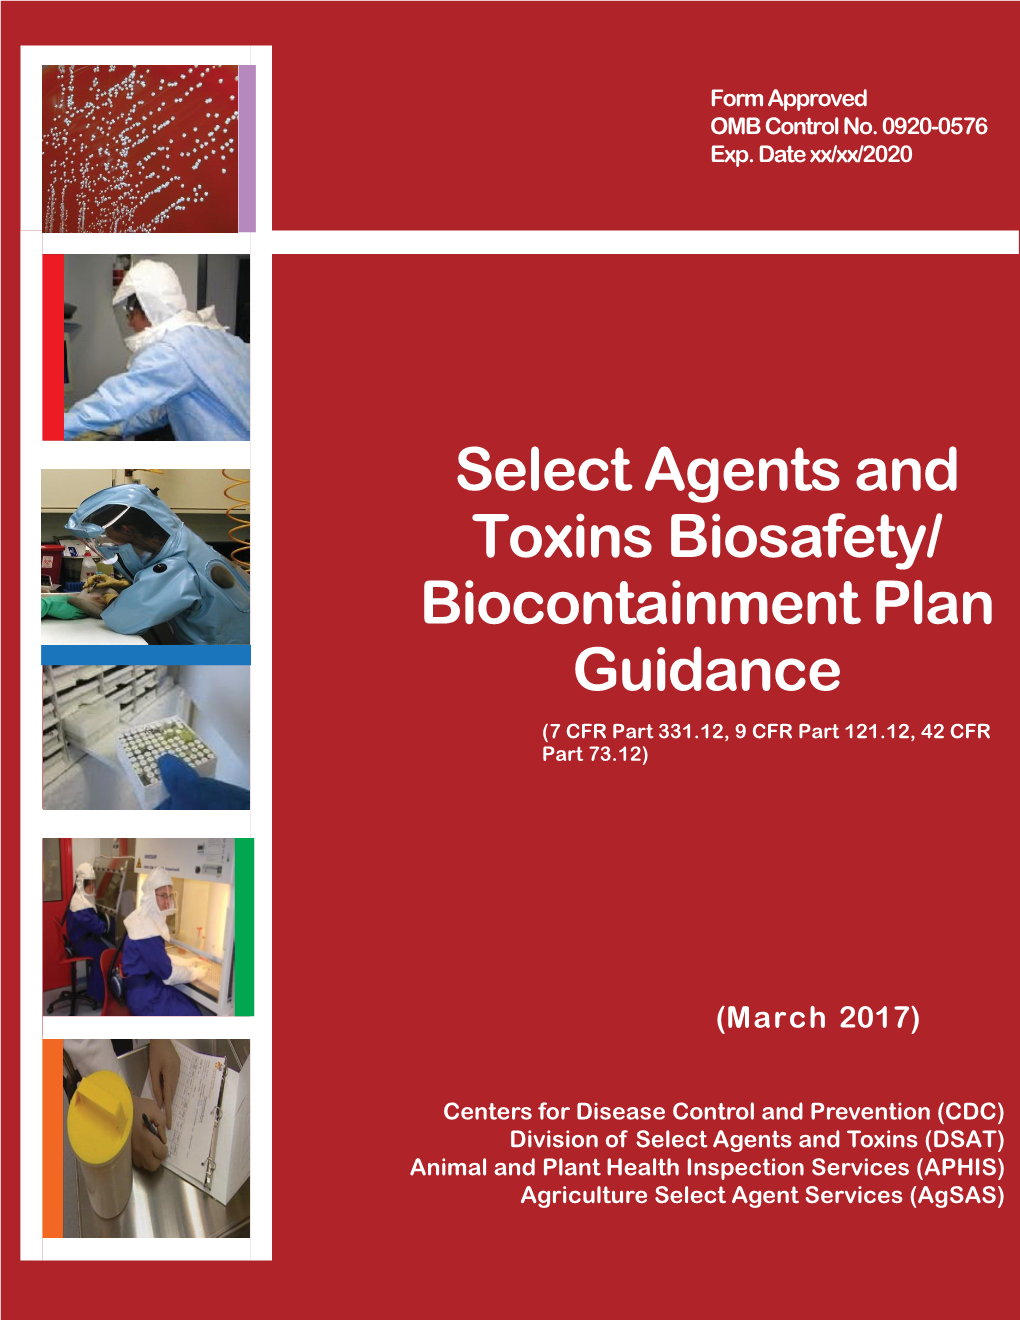 Select Agents and Toxins Biosafety/ Biocontainment Plan Guidance (7 CFR Part 331.12, 9 CFR Part 121.12, 42 CFR Part 73.12)